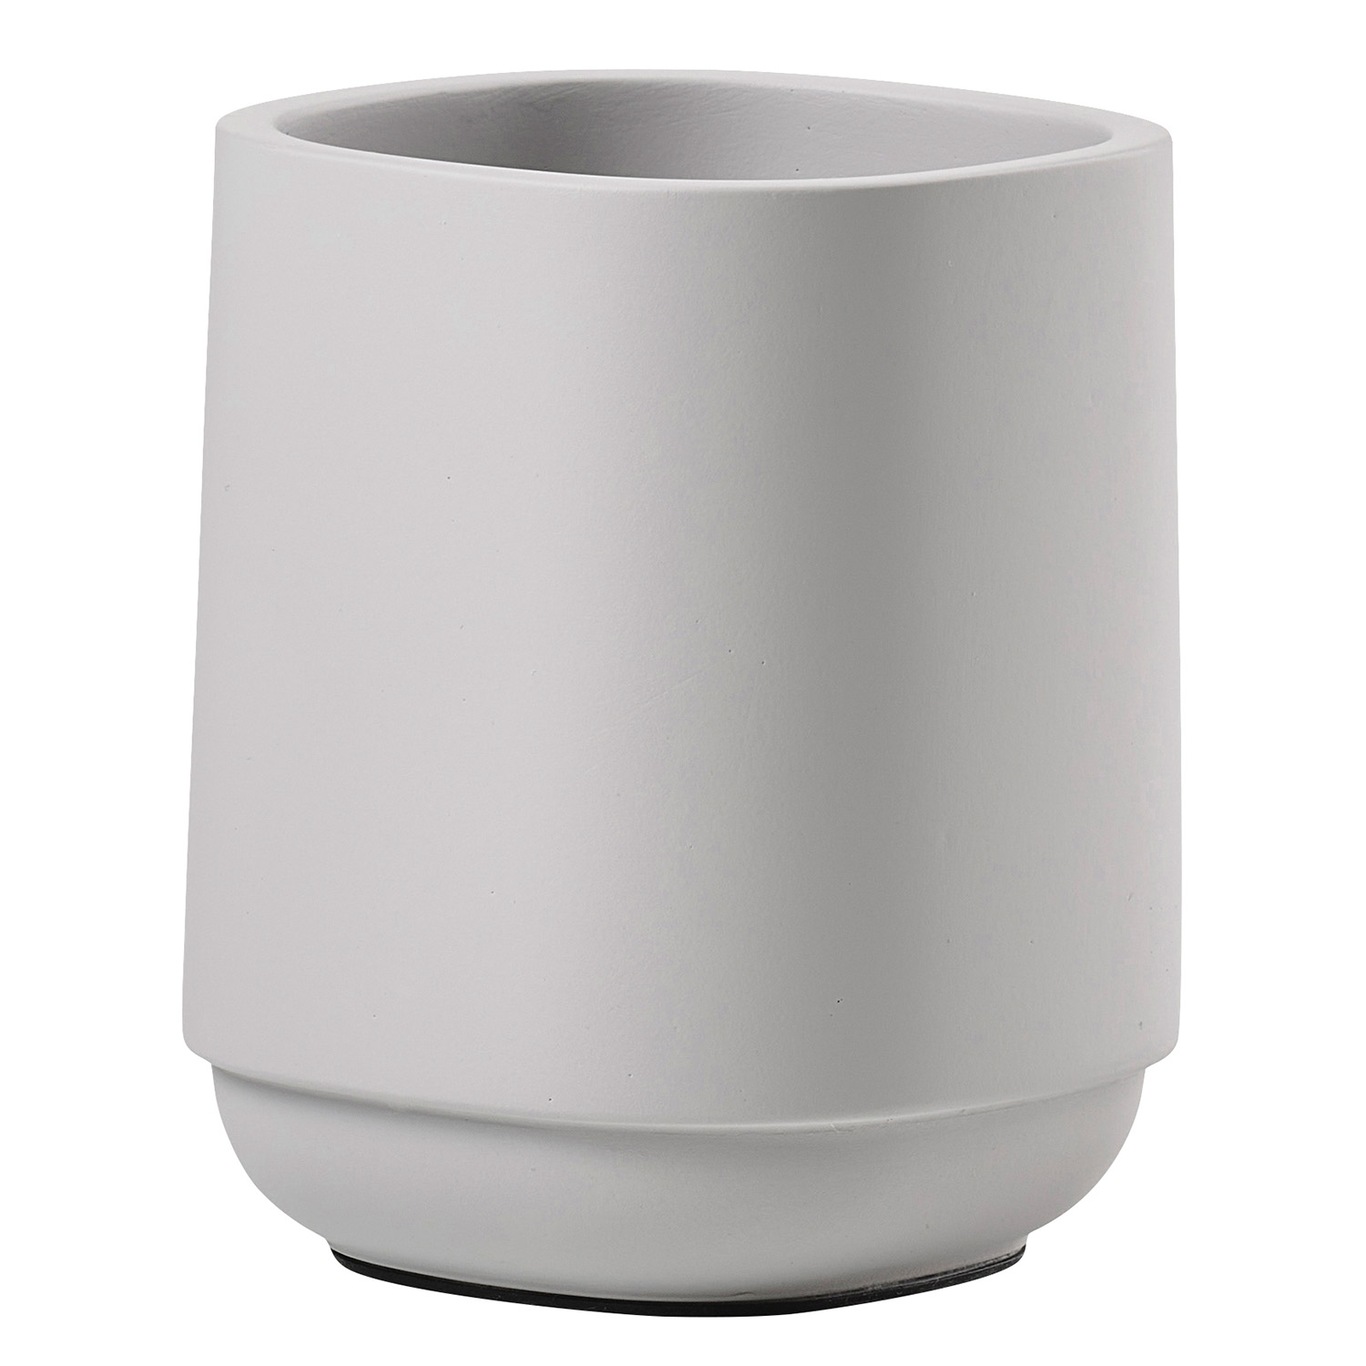 Time Toothbrush Holder, Soft Grey